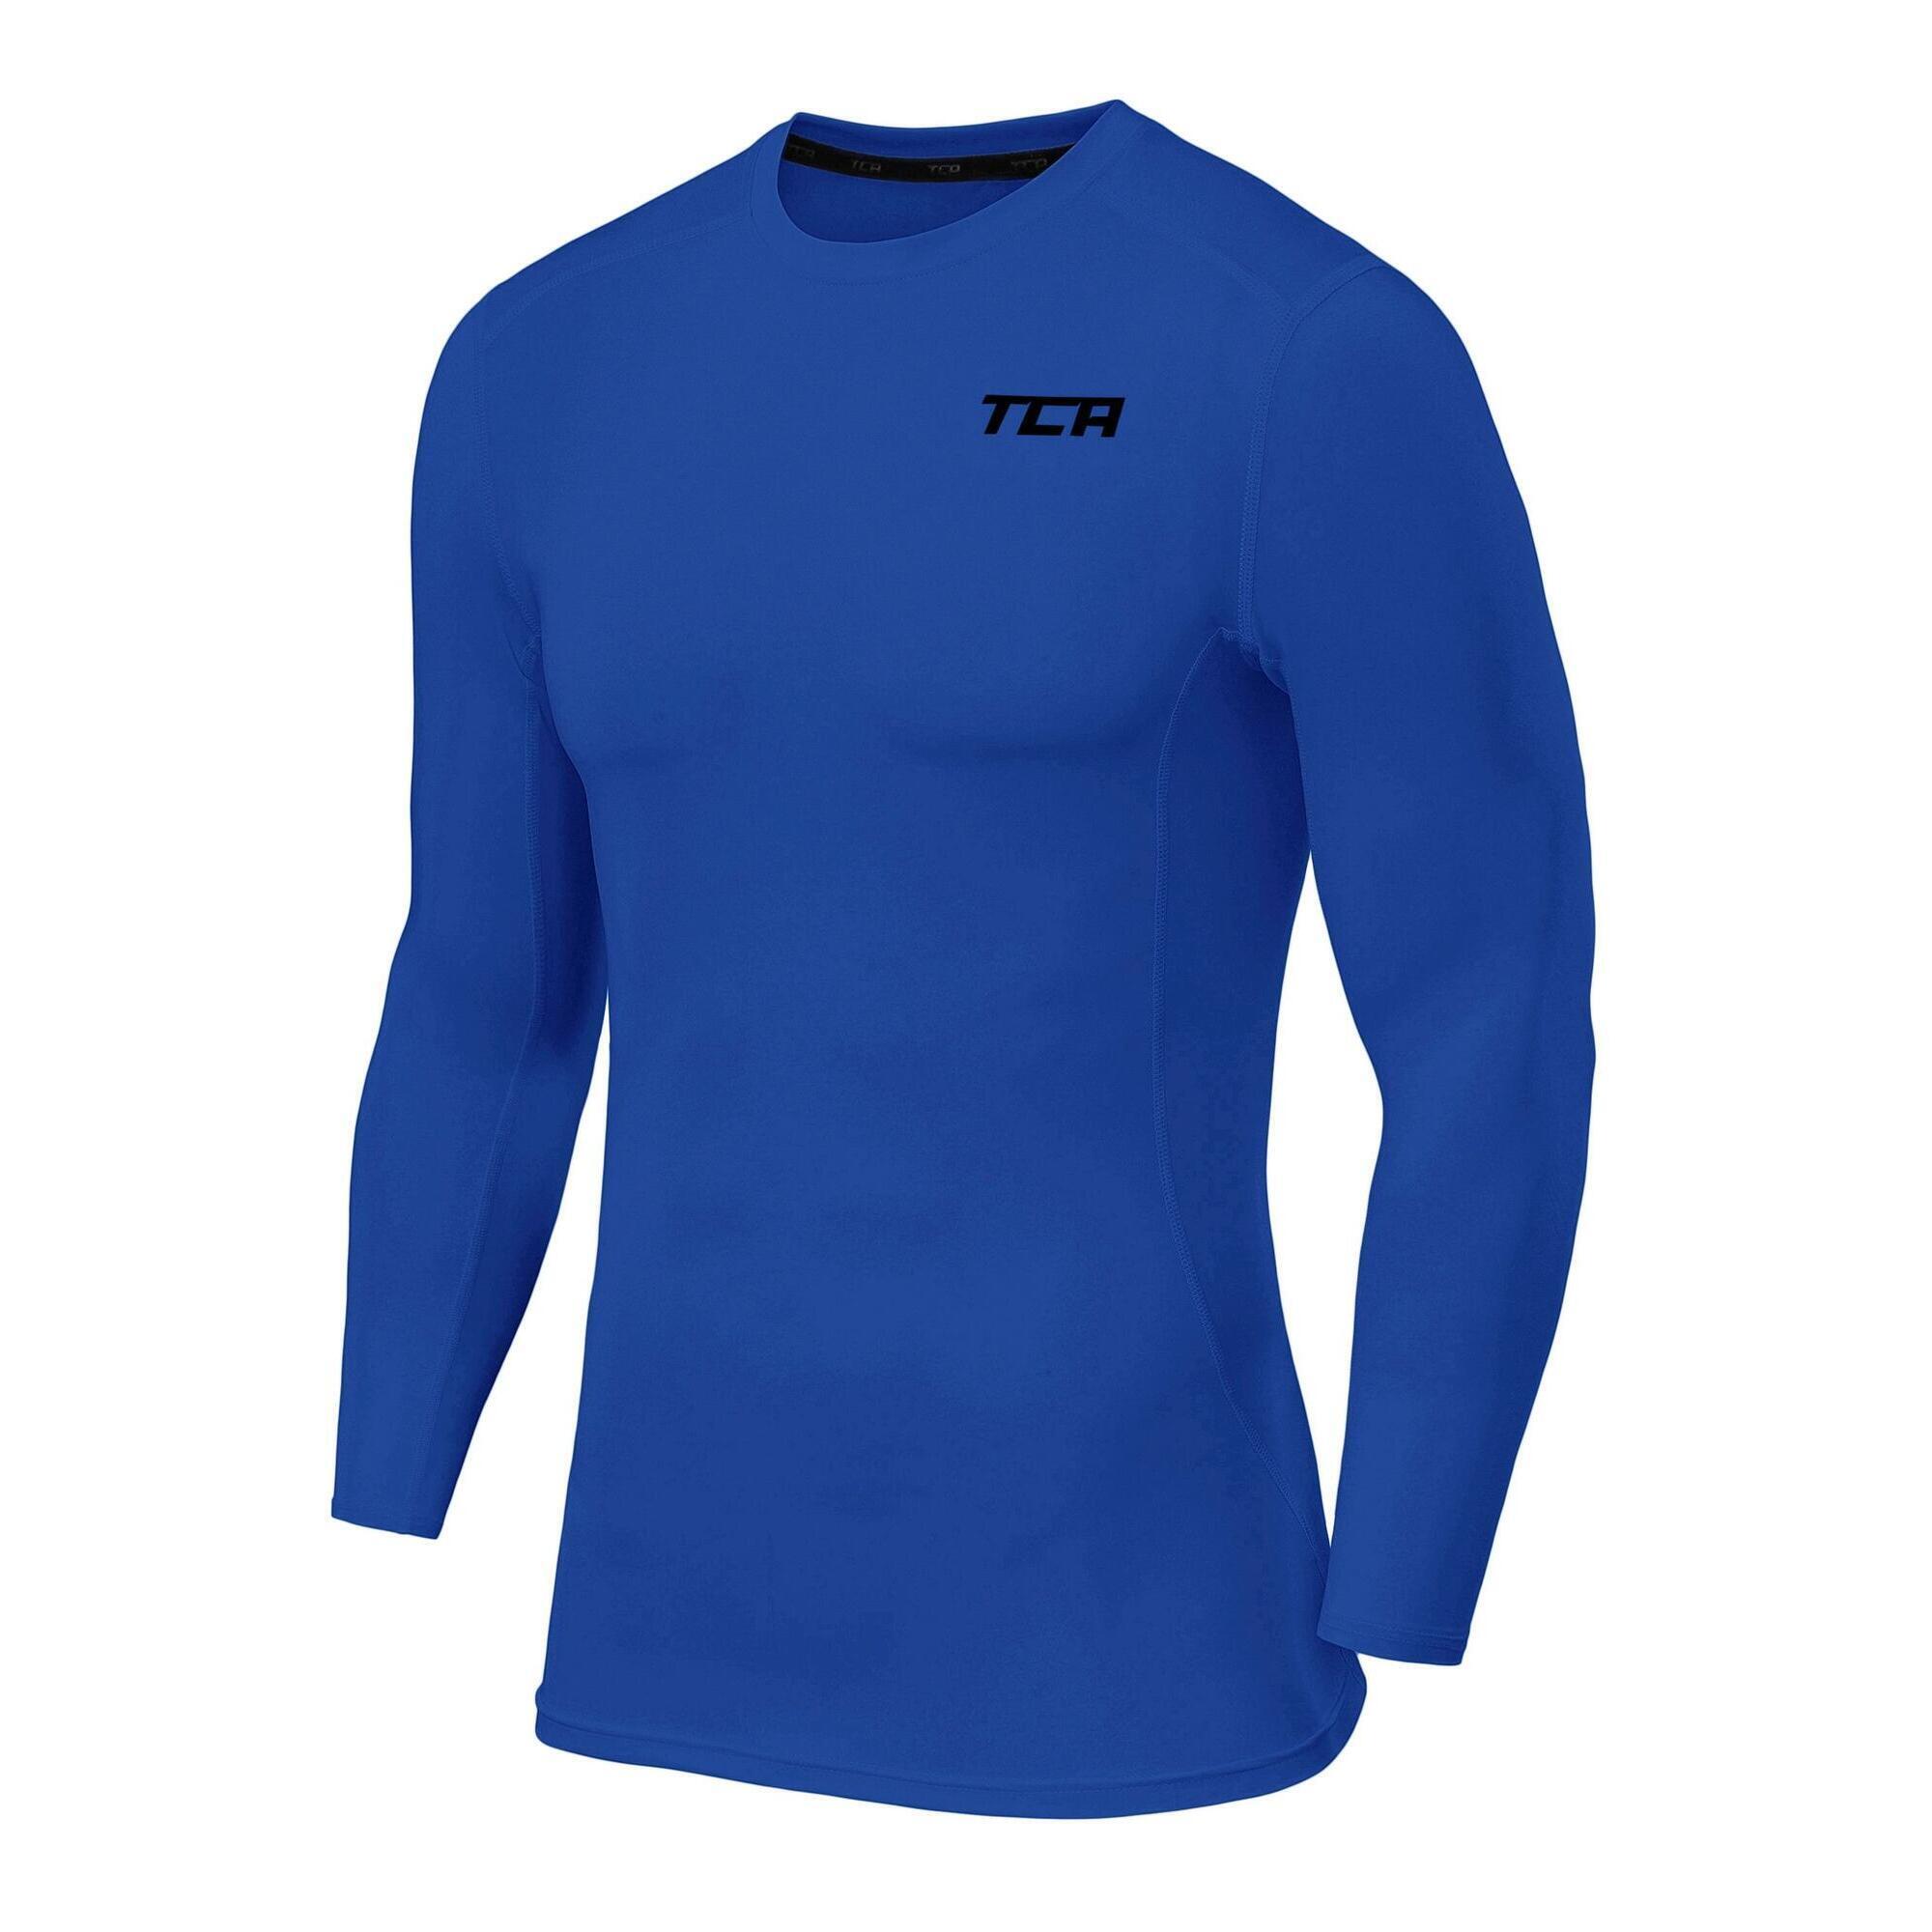 Men's Power Base Layer Compression Long Sleeve Top - Dazzling Blue 1/5